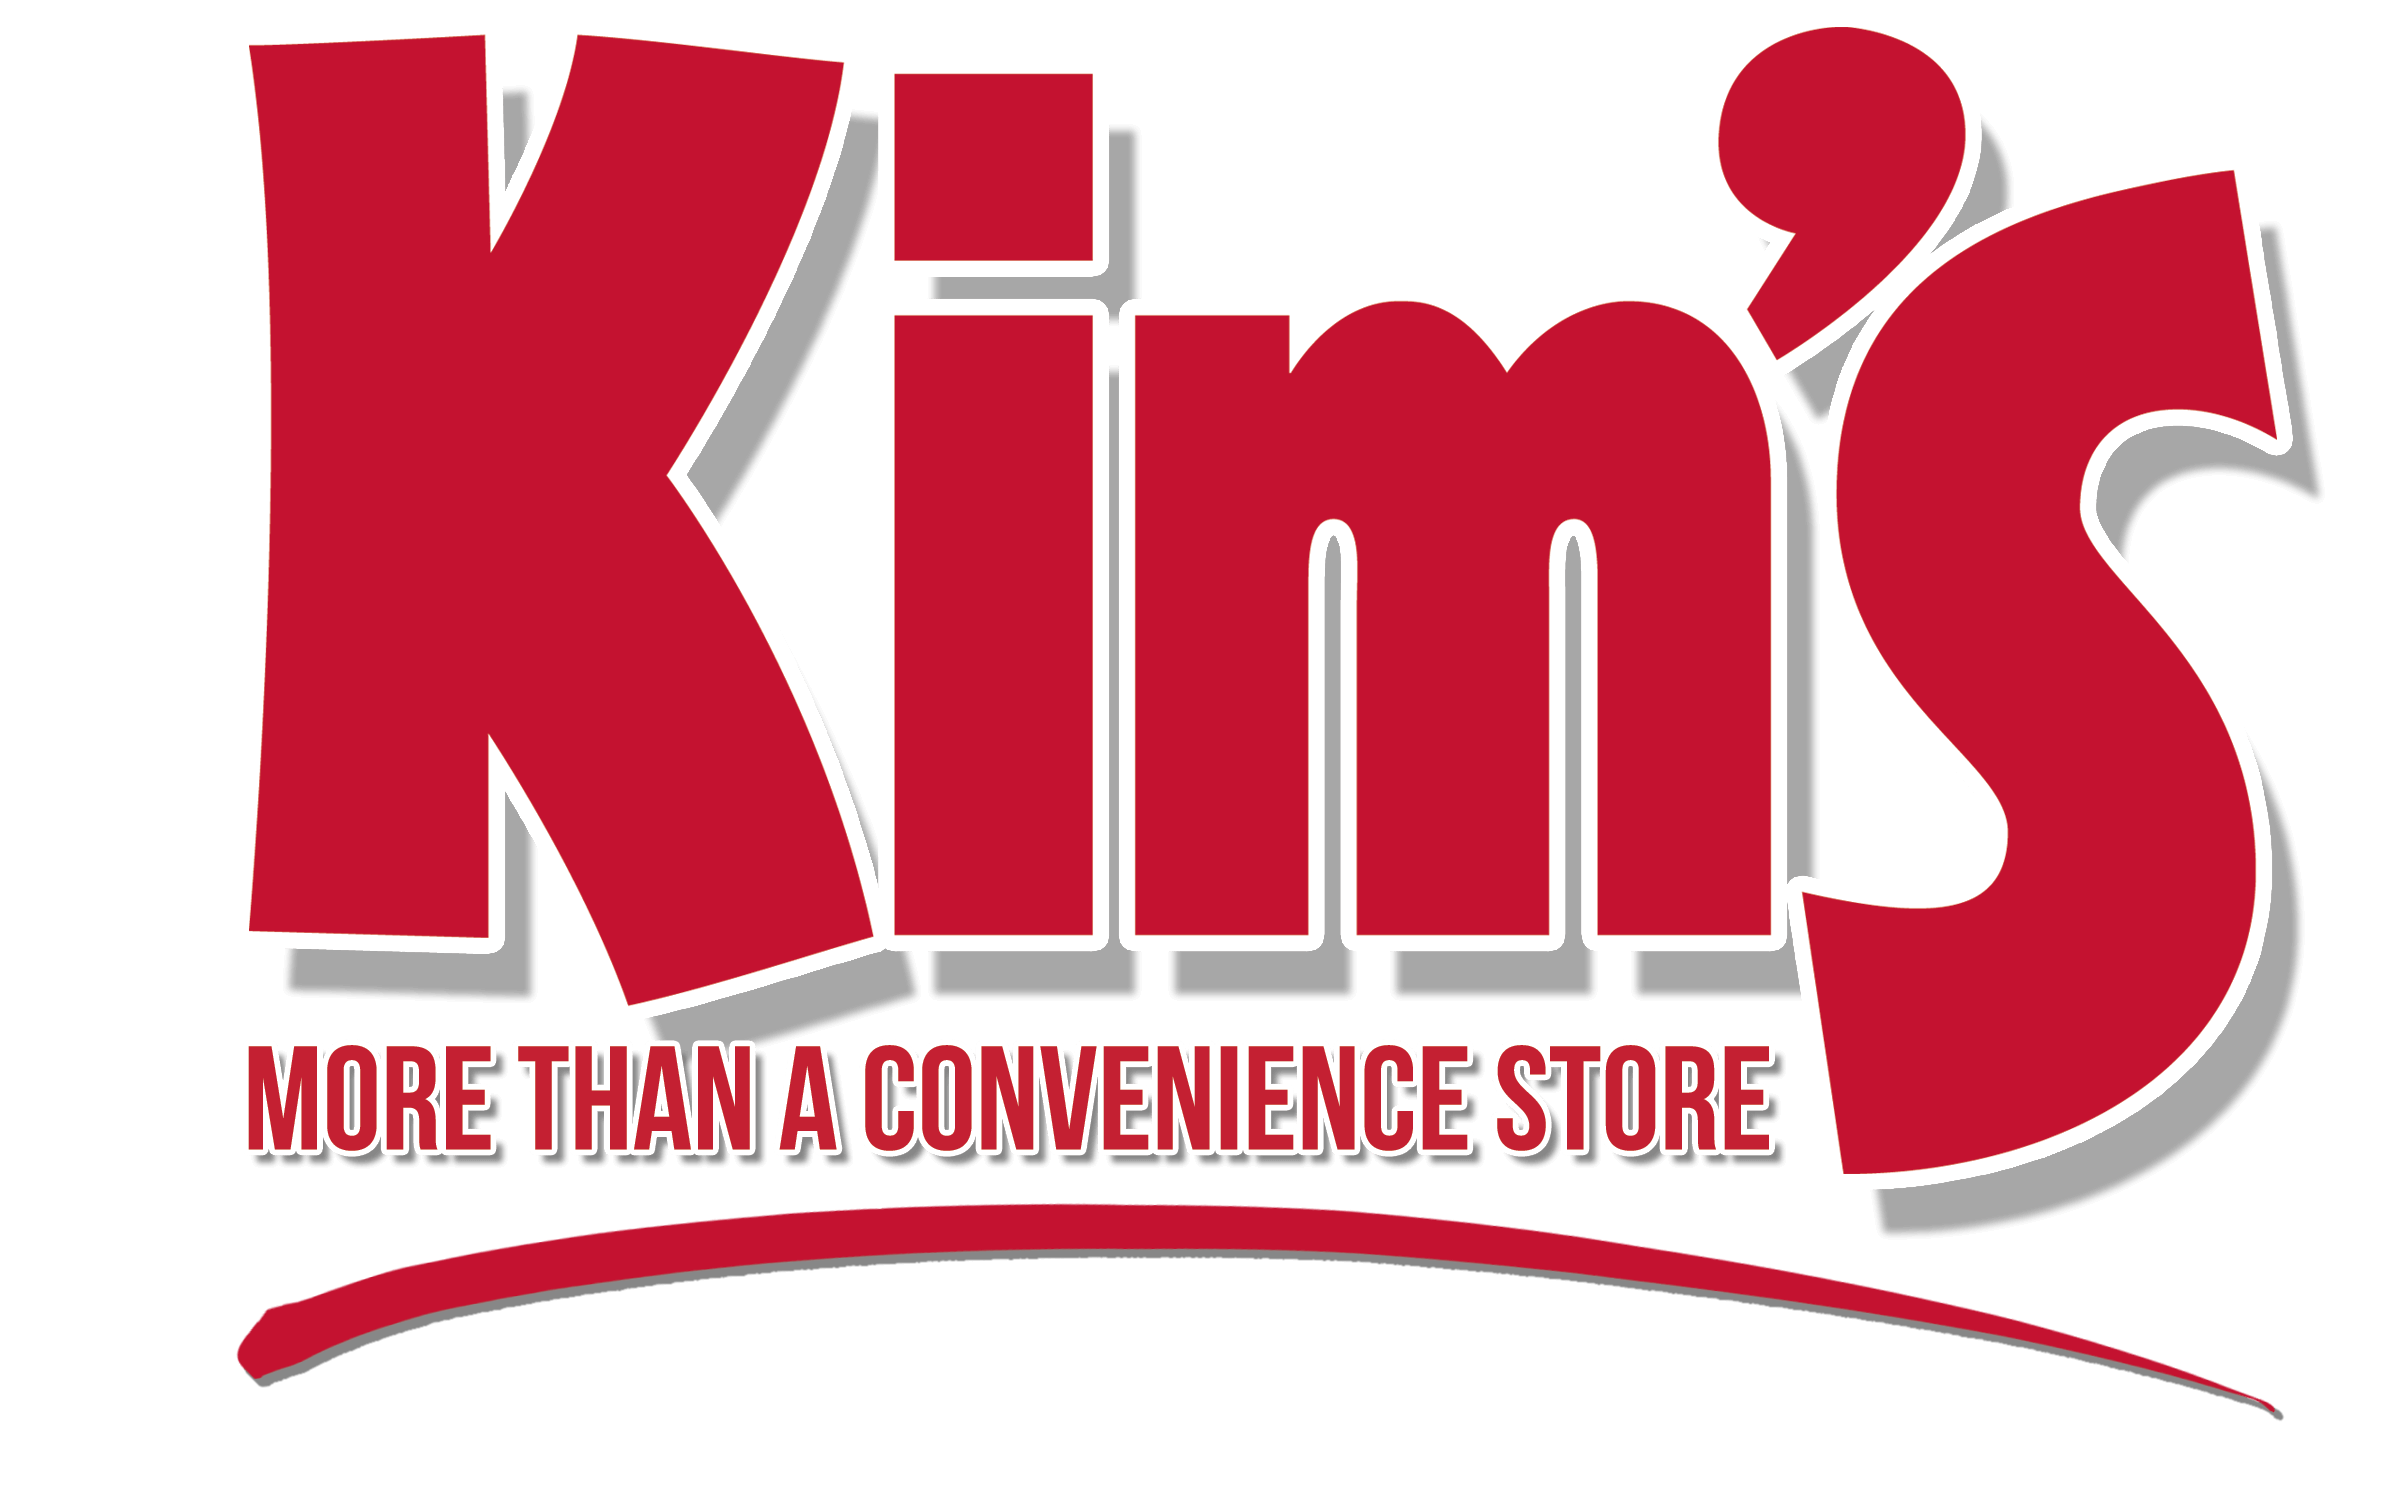 KIMS MORE THAN A C STORE